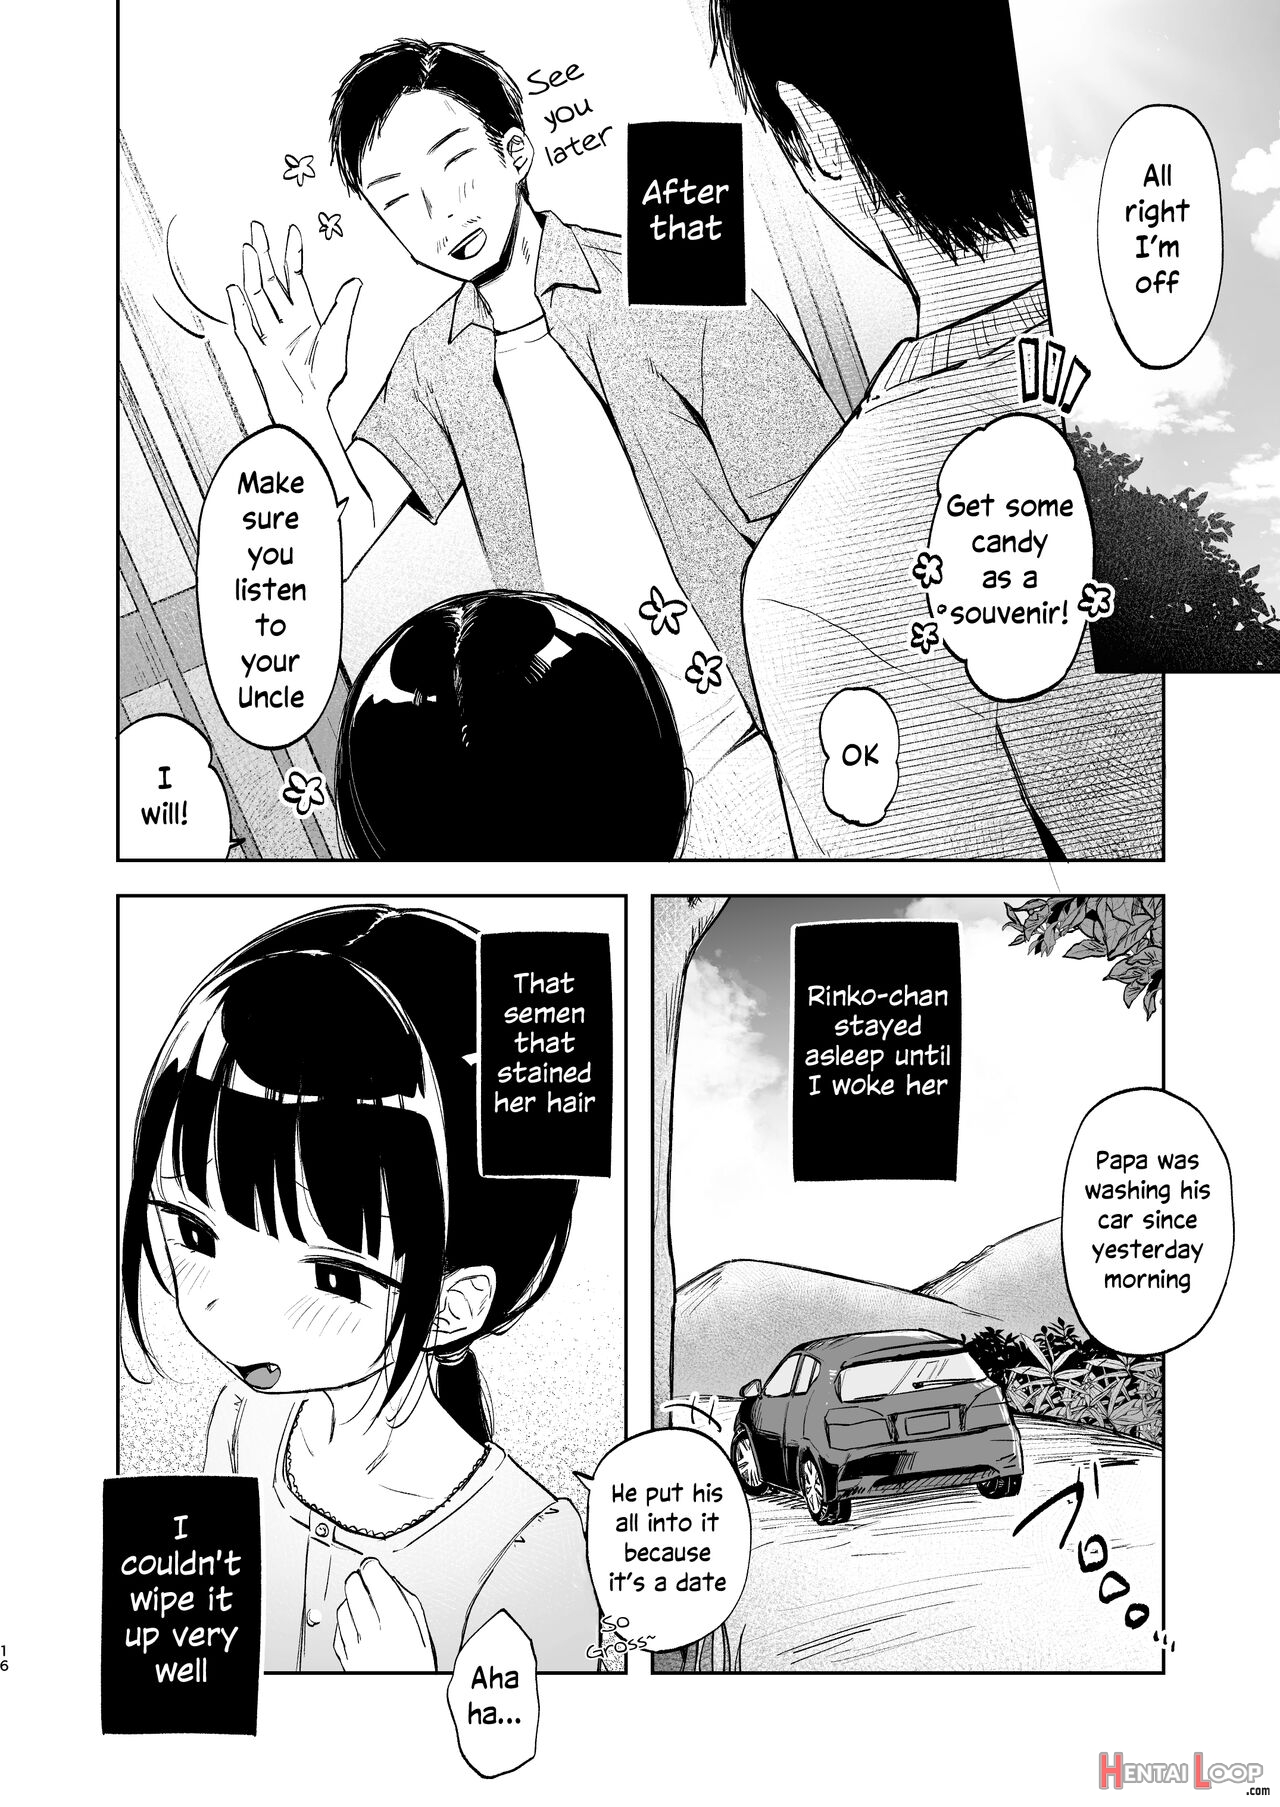 Rinko And Her Uncle's First Summer Vacation page 15